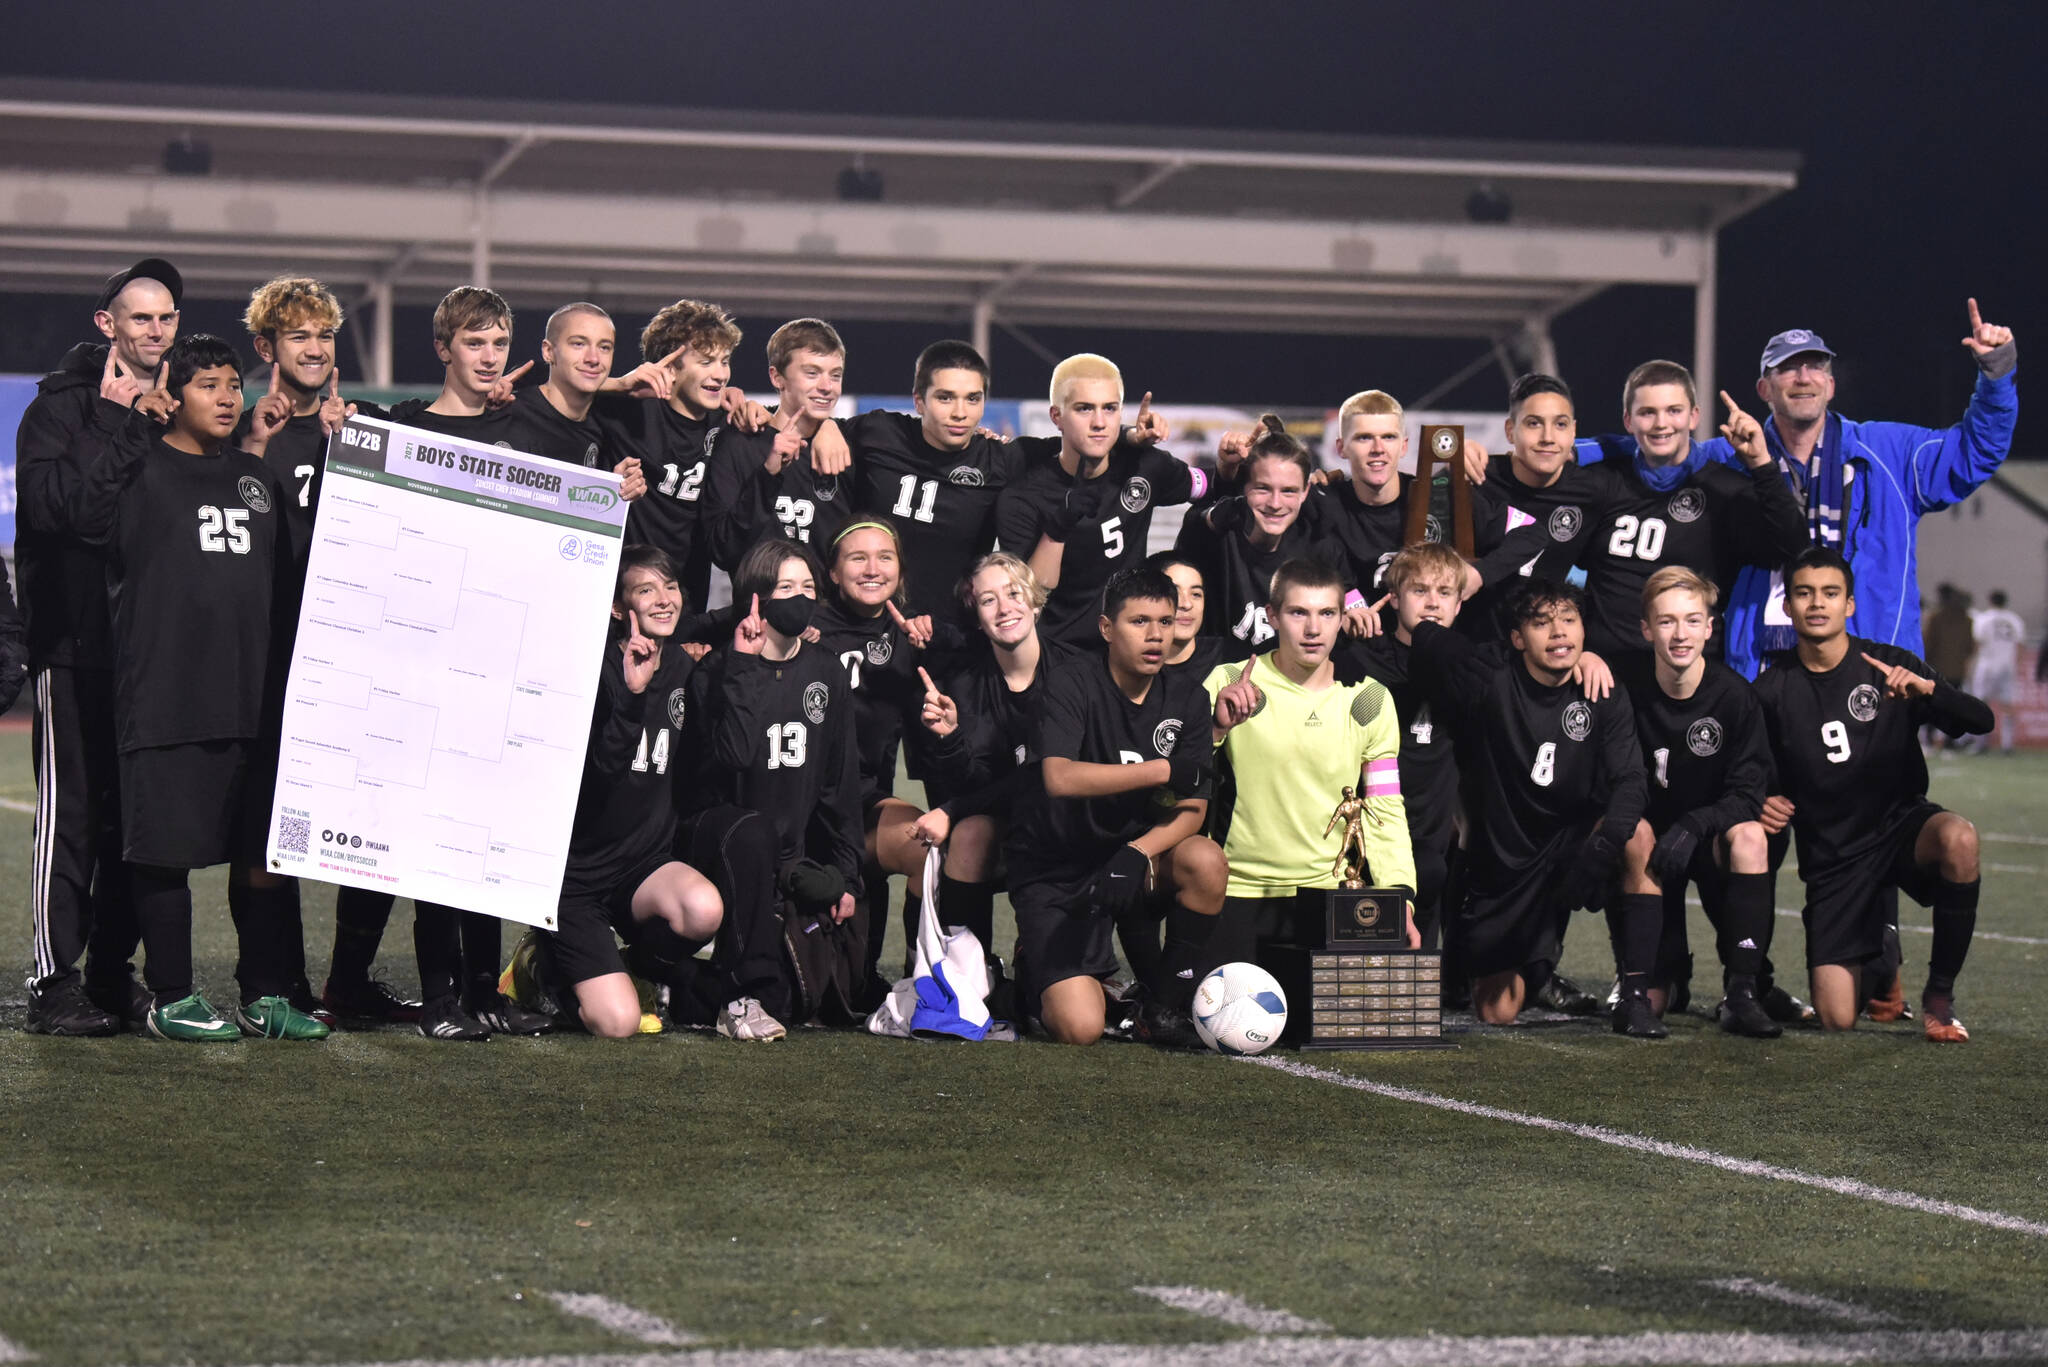 Chris Sutton photo
The victorious Vikings after their big win at the state soccer championships.